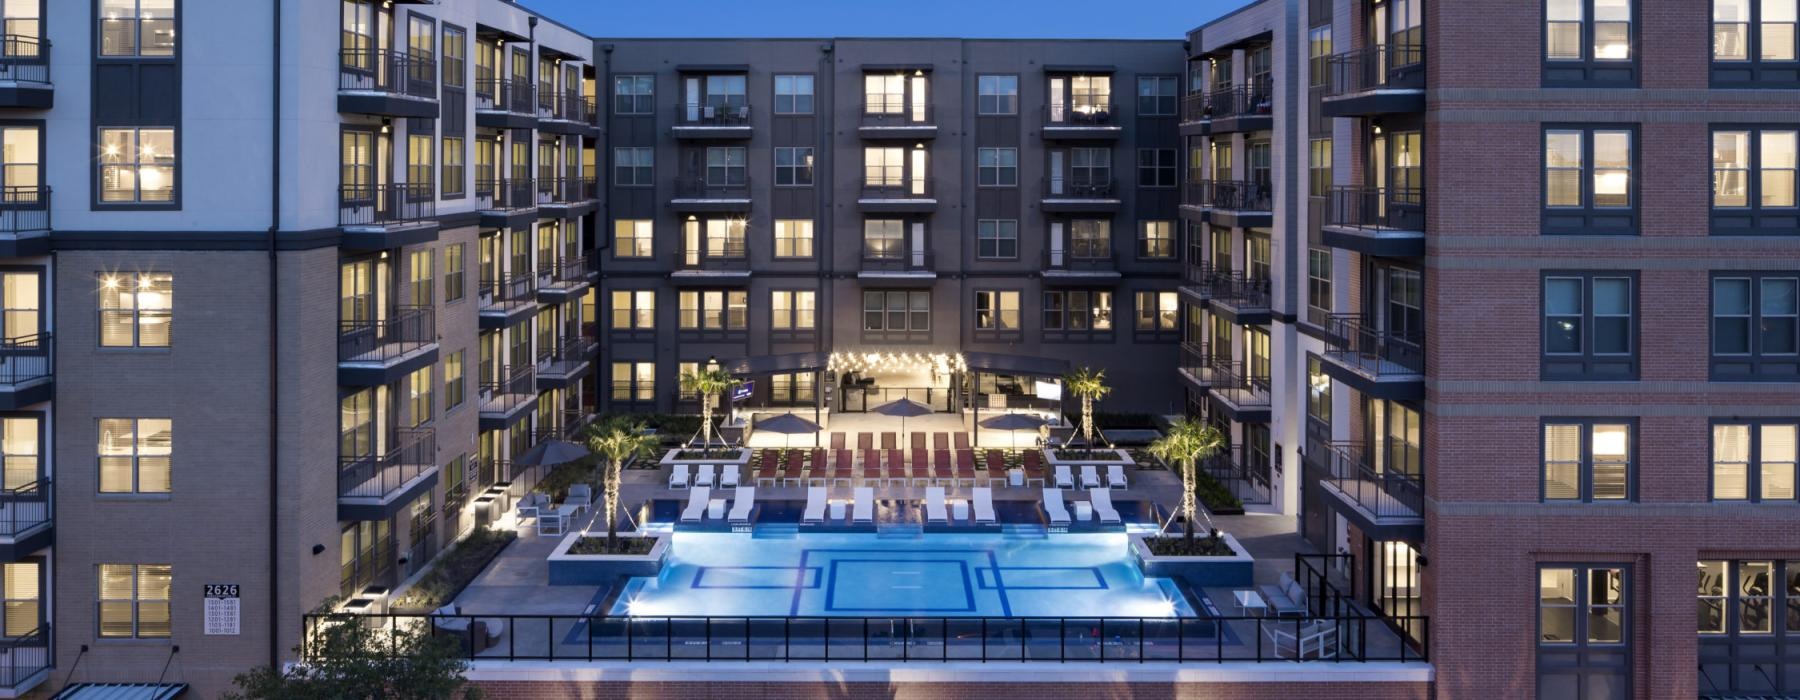 rooftop pool and surrounding amenities